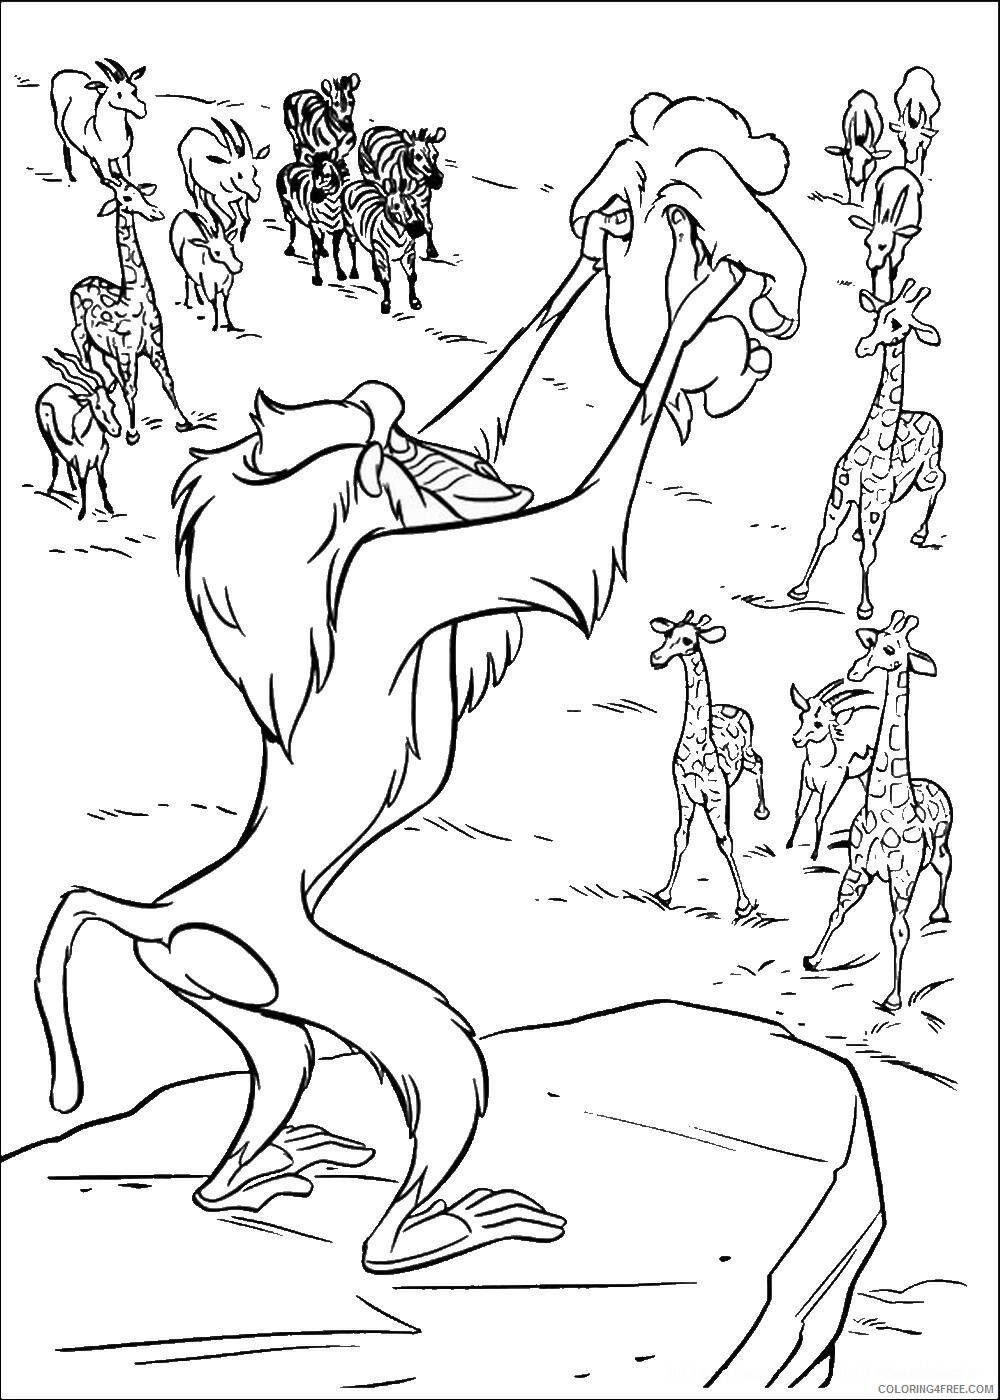 The Lion King Coloring Pages TV Film lion king 112 Printable 2020 09213 Coloring4free